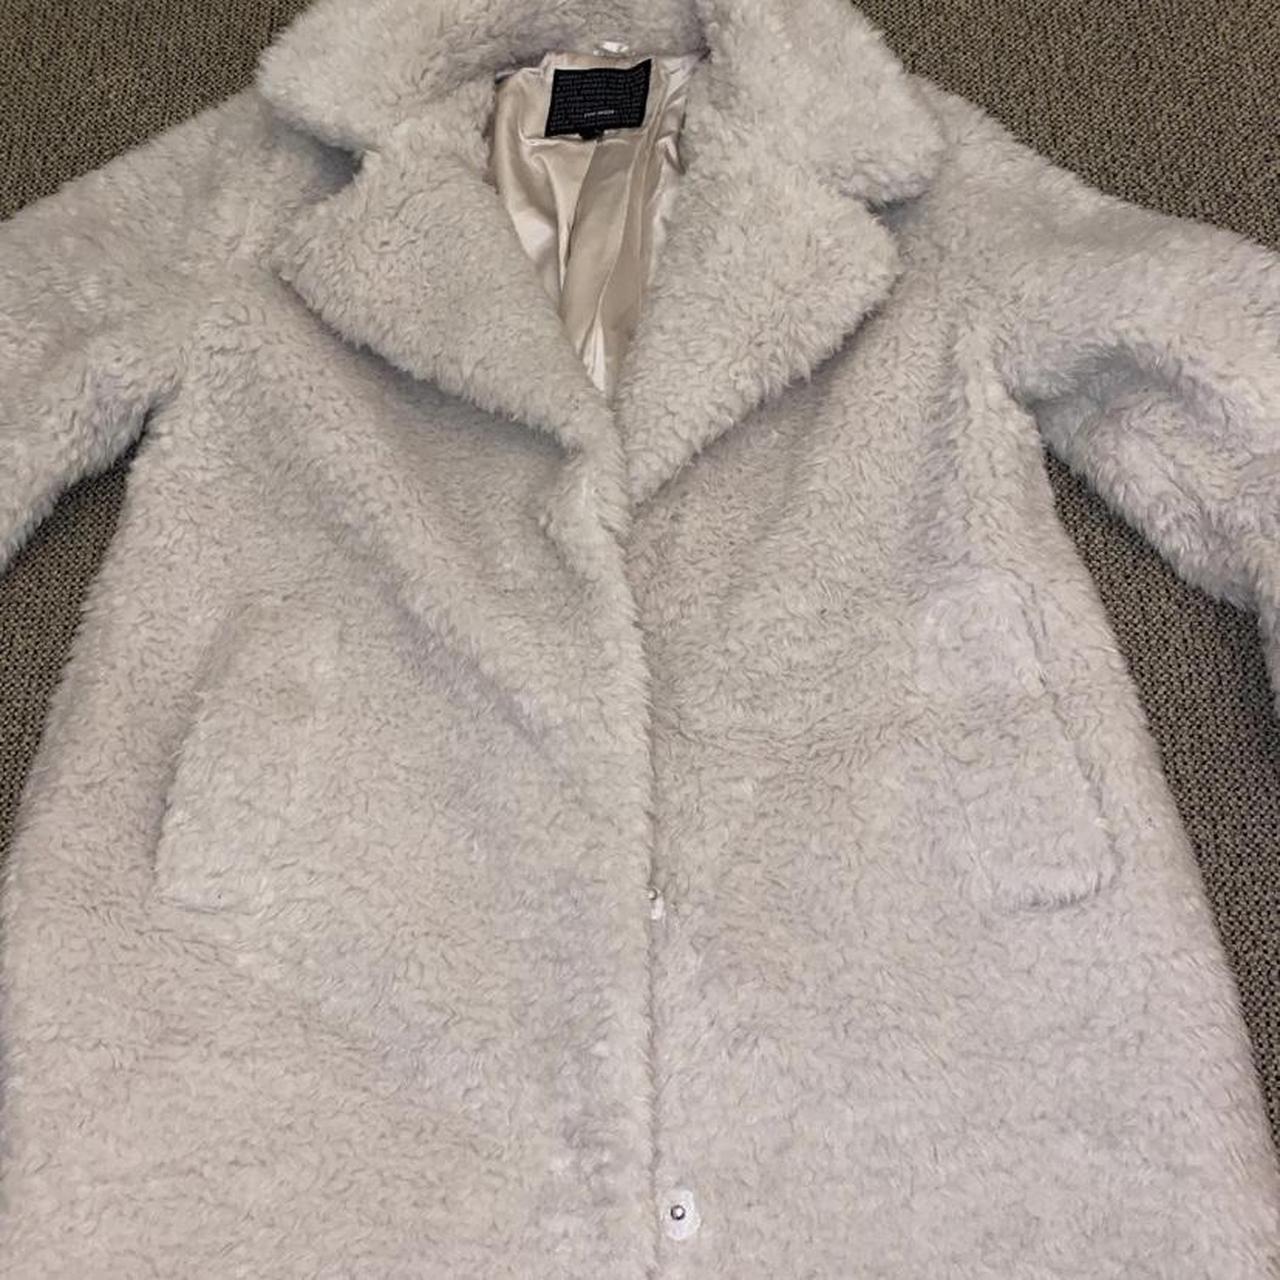 Steve Madden shearling coat size M New without tag /... - Depop